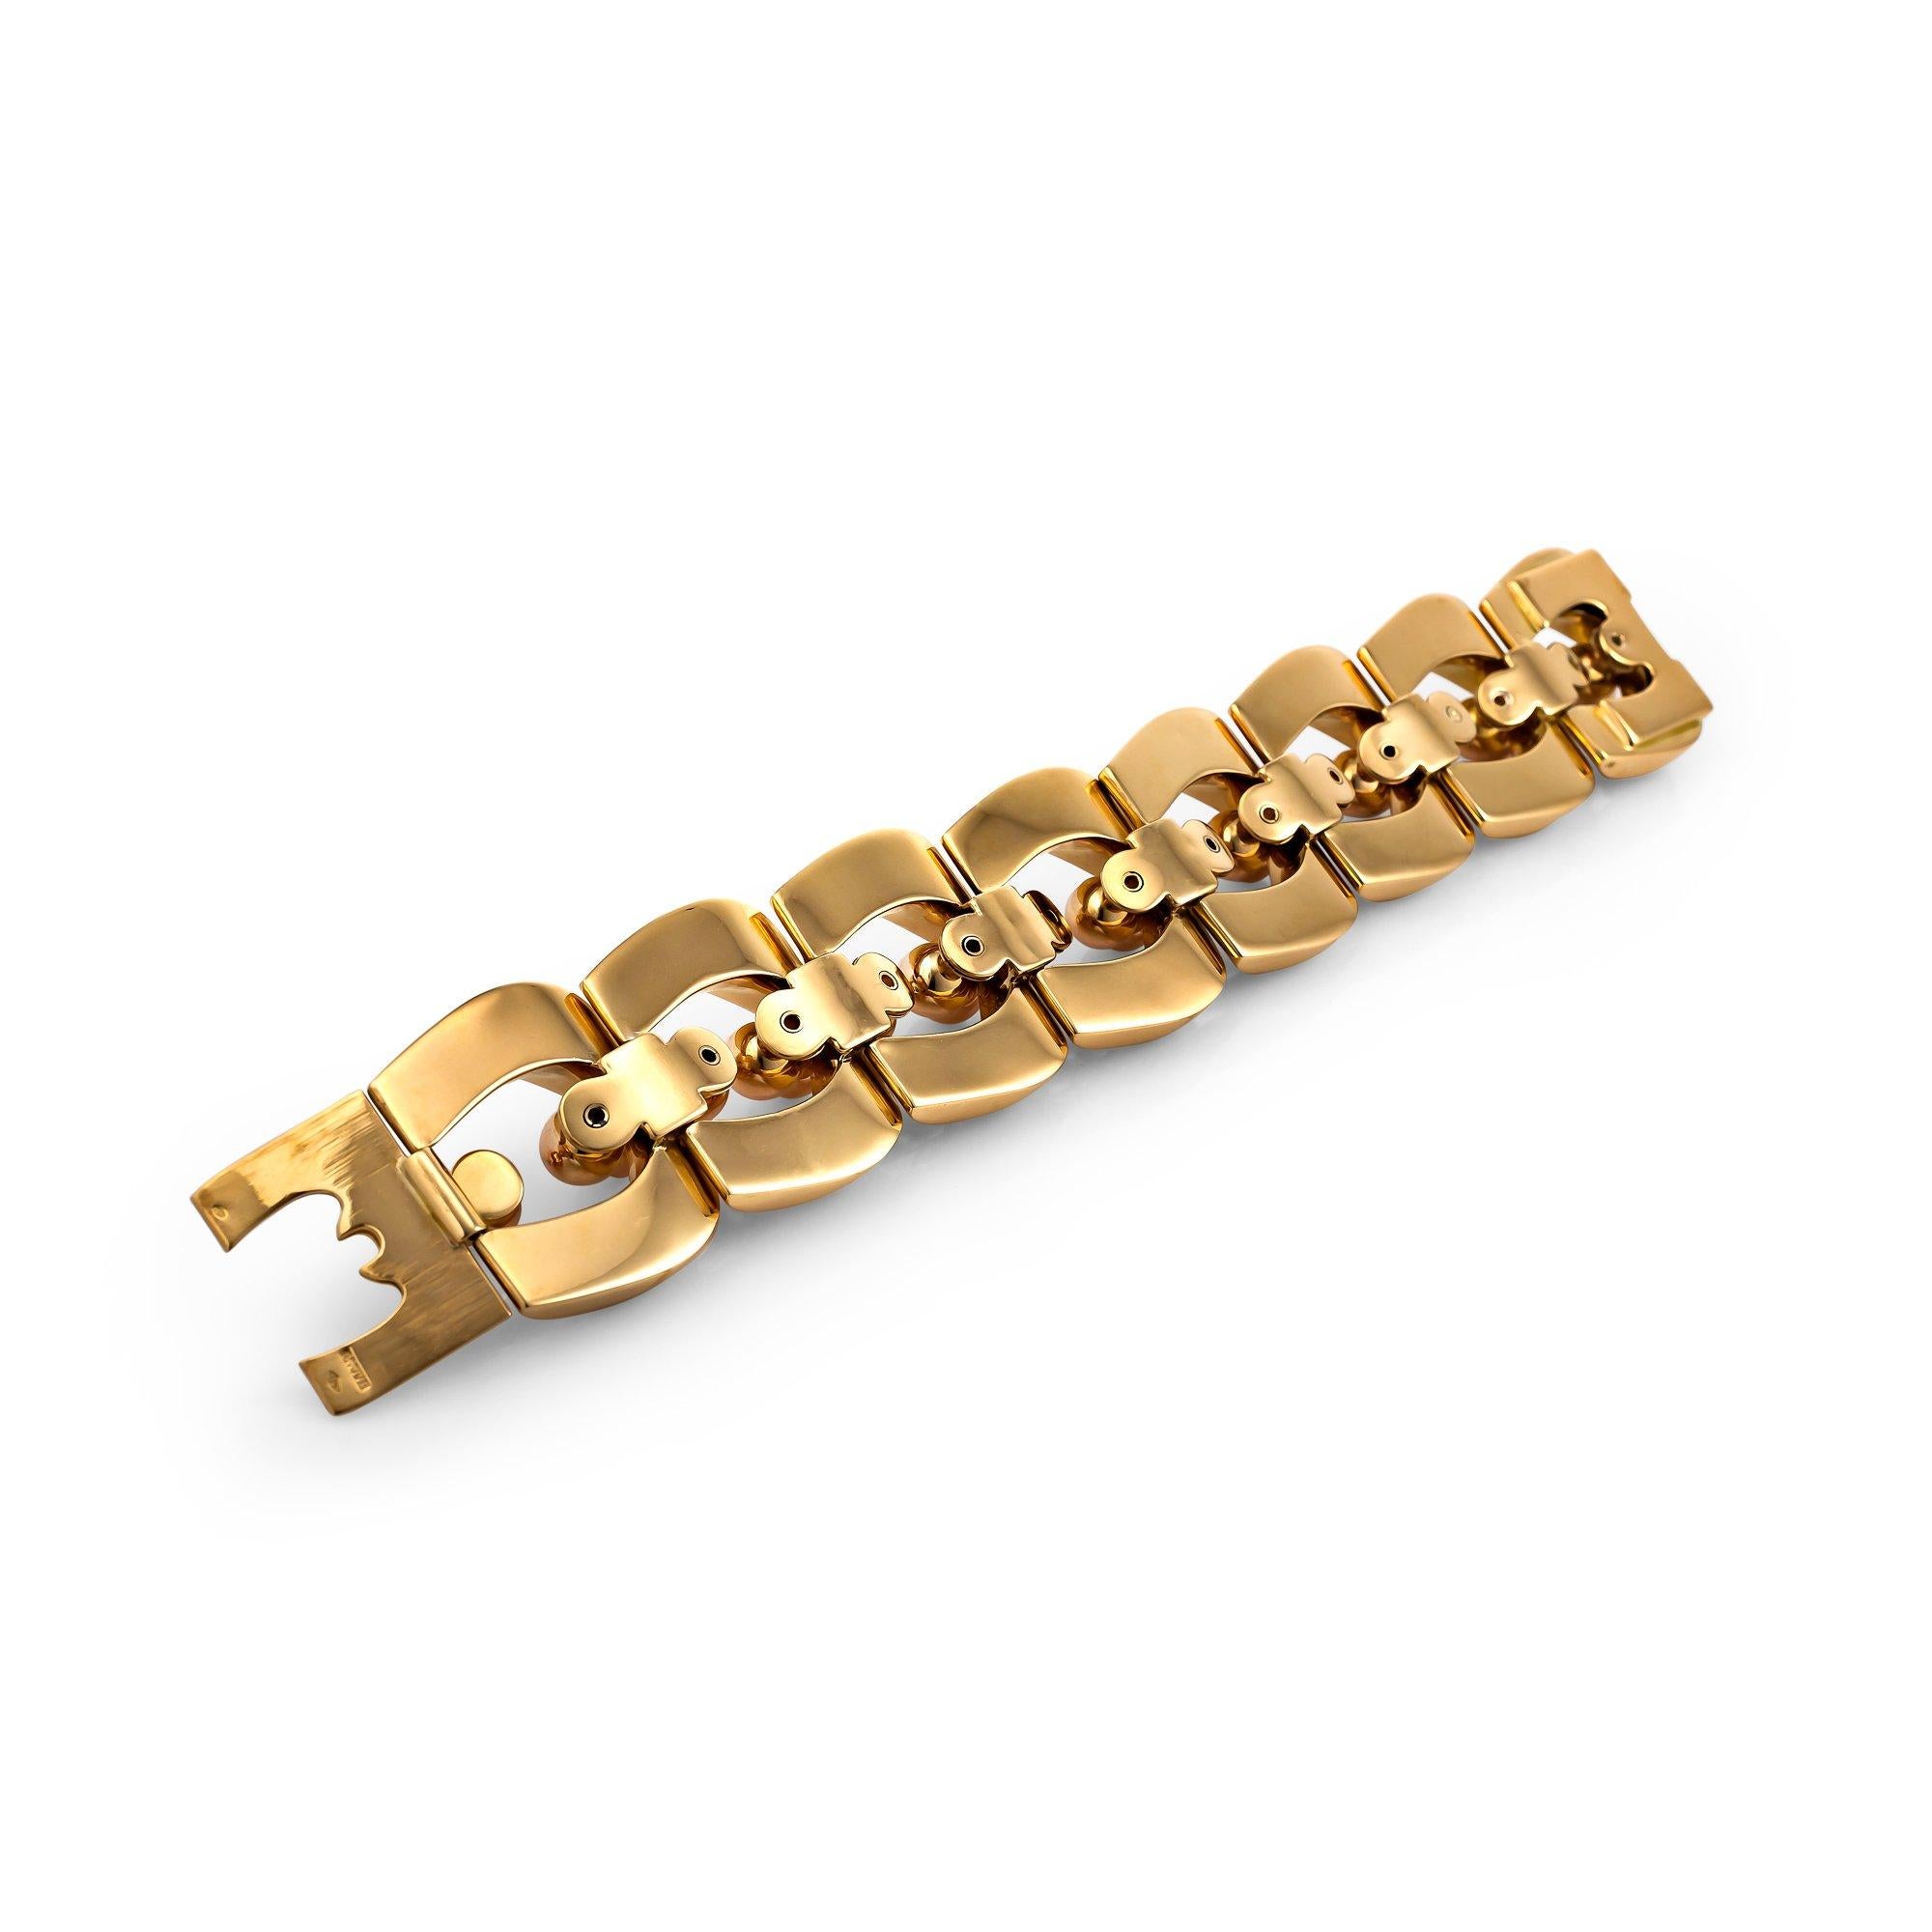 Designed in the 1940's by Bulgari and influenced by World War II, this one-of-a-kind handmade bracelet draws it's inspiration from wartime tank tracks and treads as well as the emergence of machine assembly line parts. Created in 18 karat yellow and